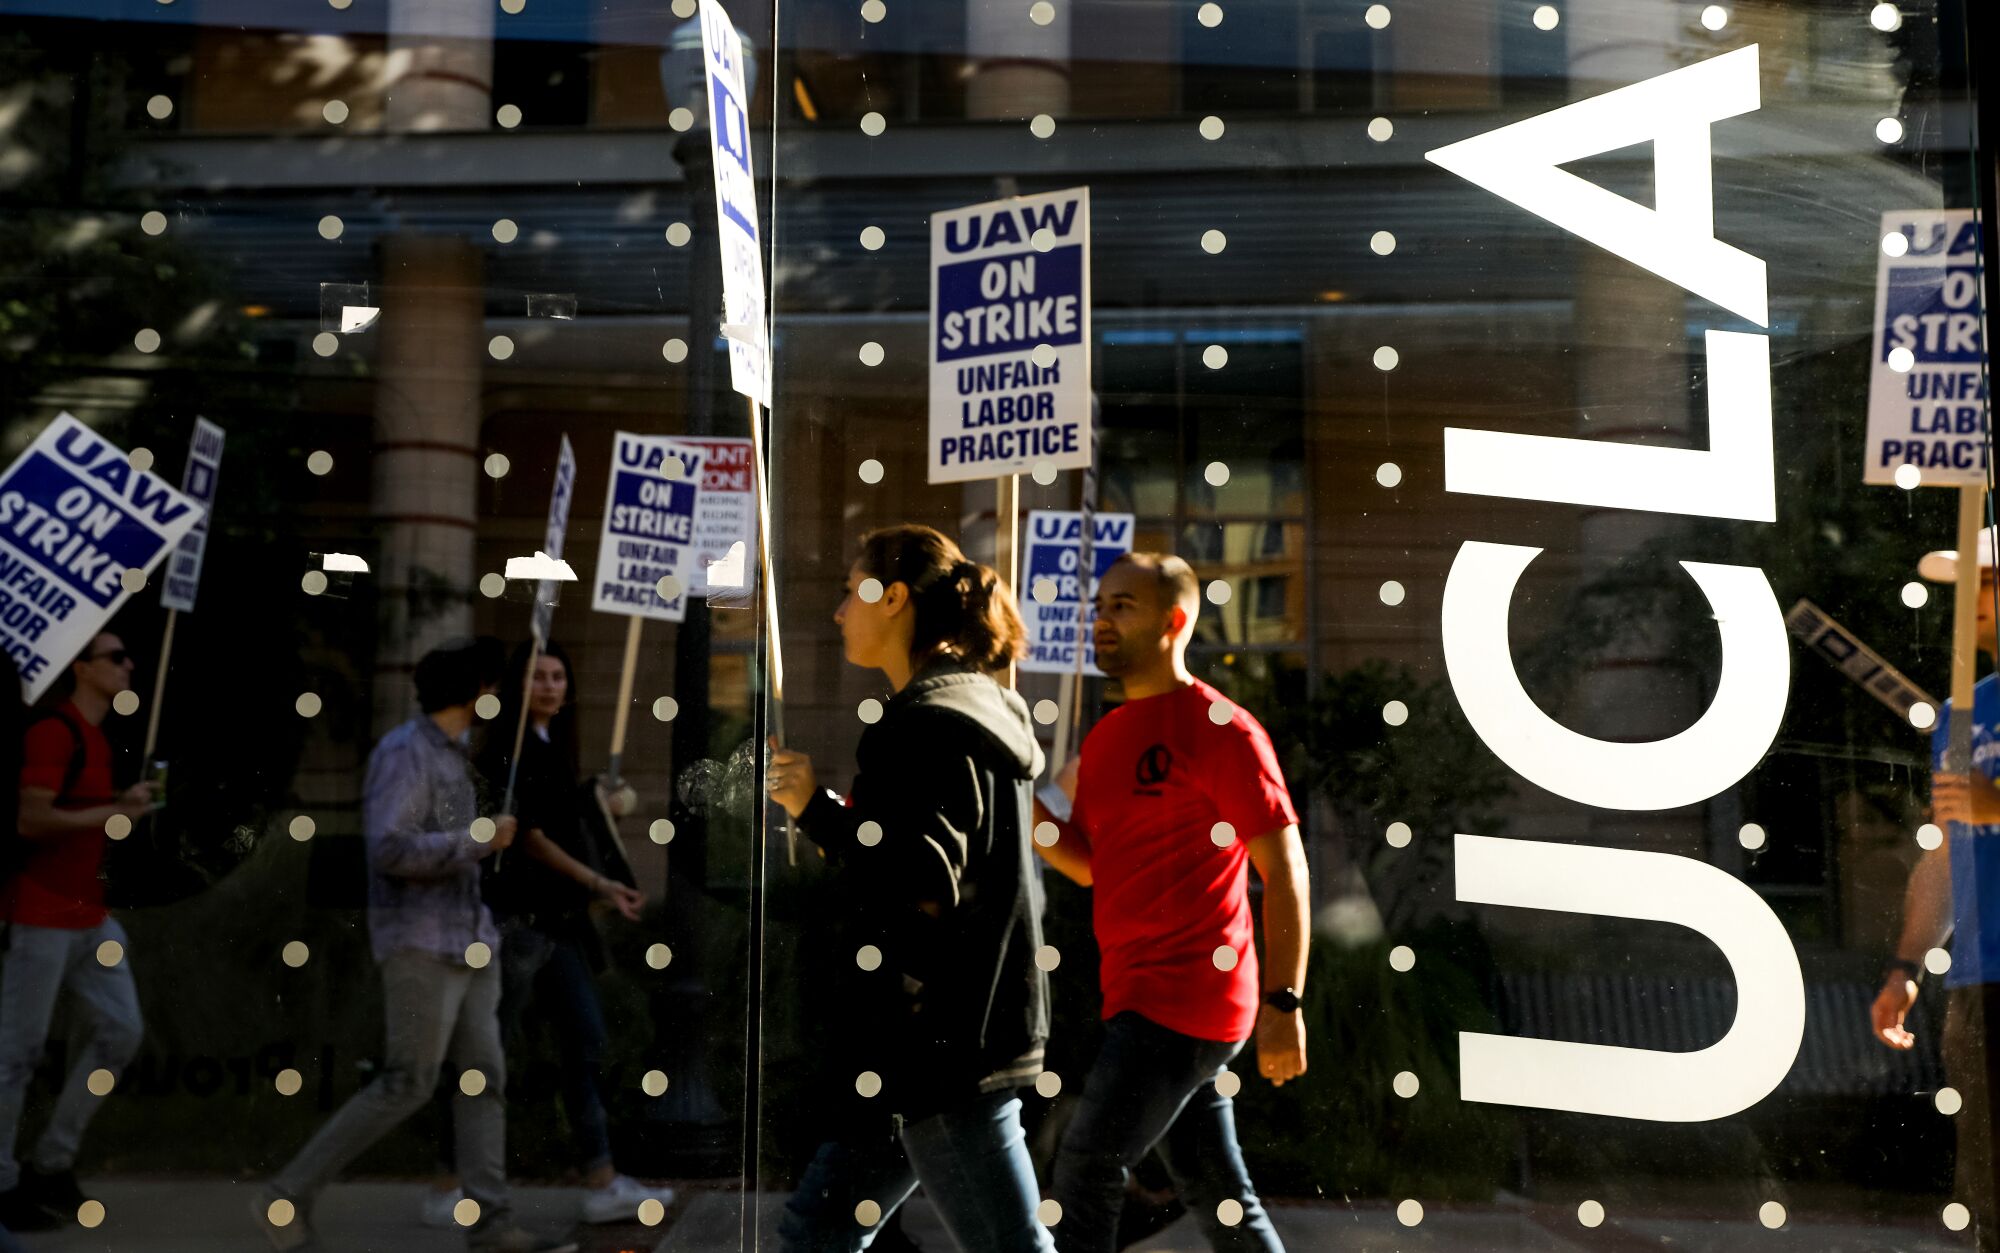 Demonstrators picket at UCLA near a window with dots and the UCLA logo on it.